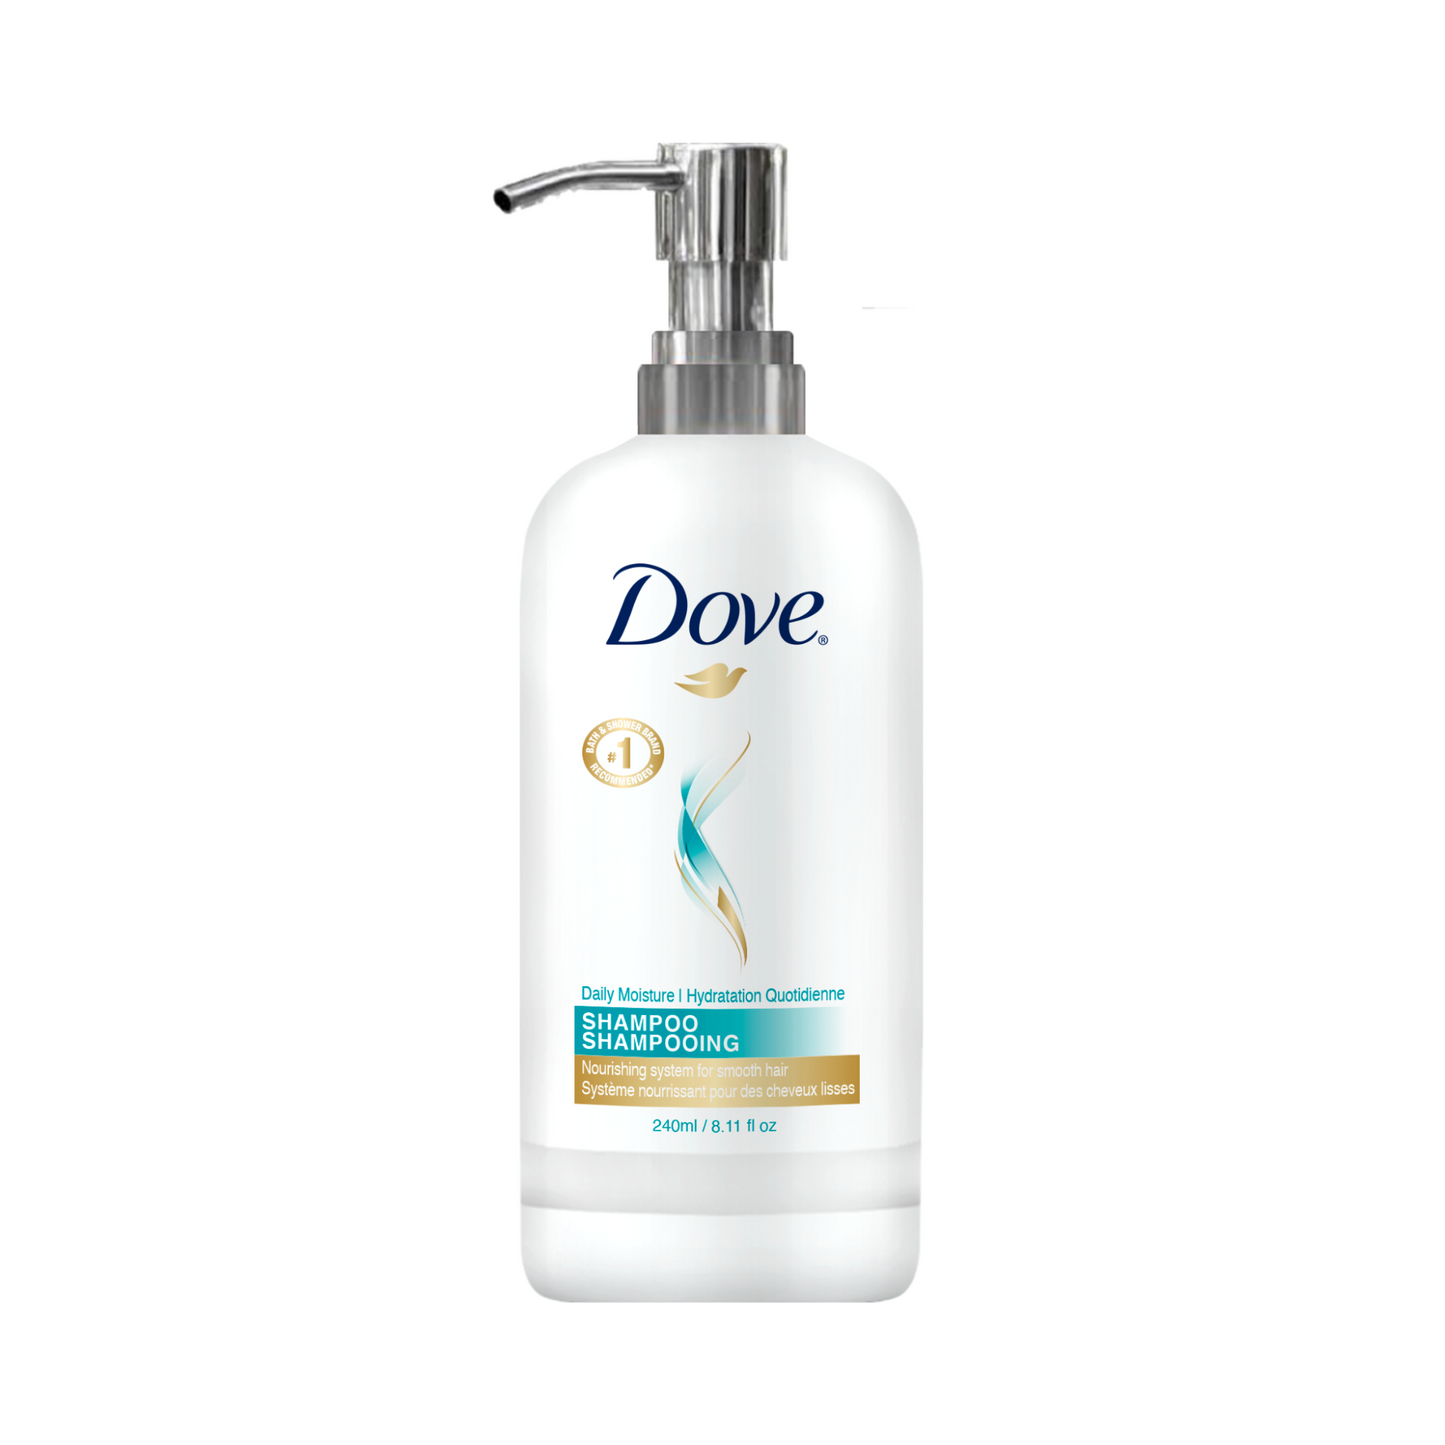 Dove Daily Moisture Shampoo bottle - 240ml - Elevate Their Stay: Dove Professional Daily Moisture Shampoo - Premium Hair Care for Remarkably Smooth and Revitalized Hair - Shop Now At Canadian Hotel Supplies